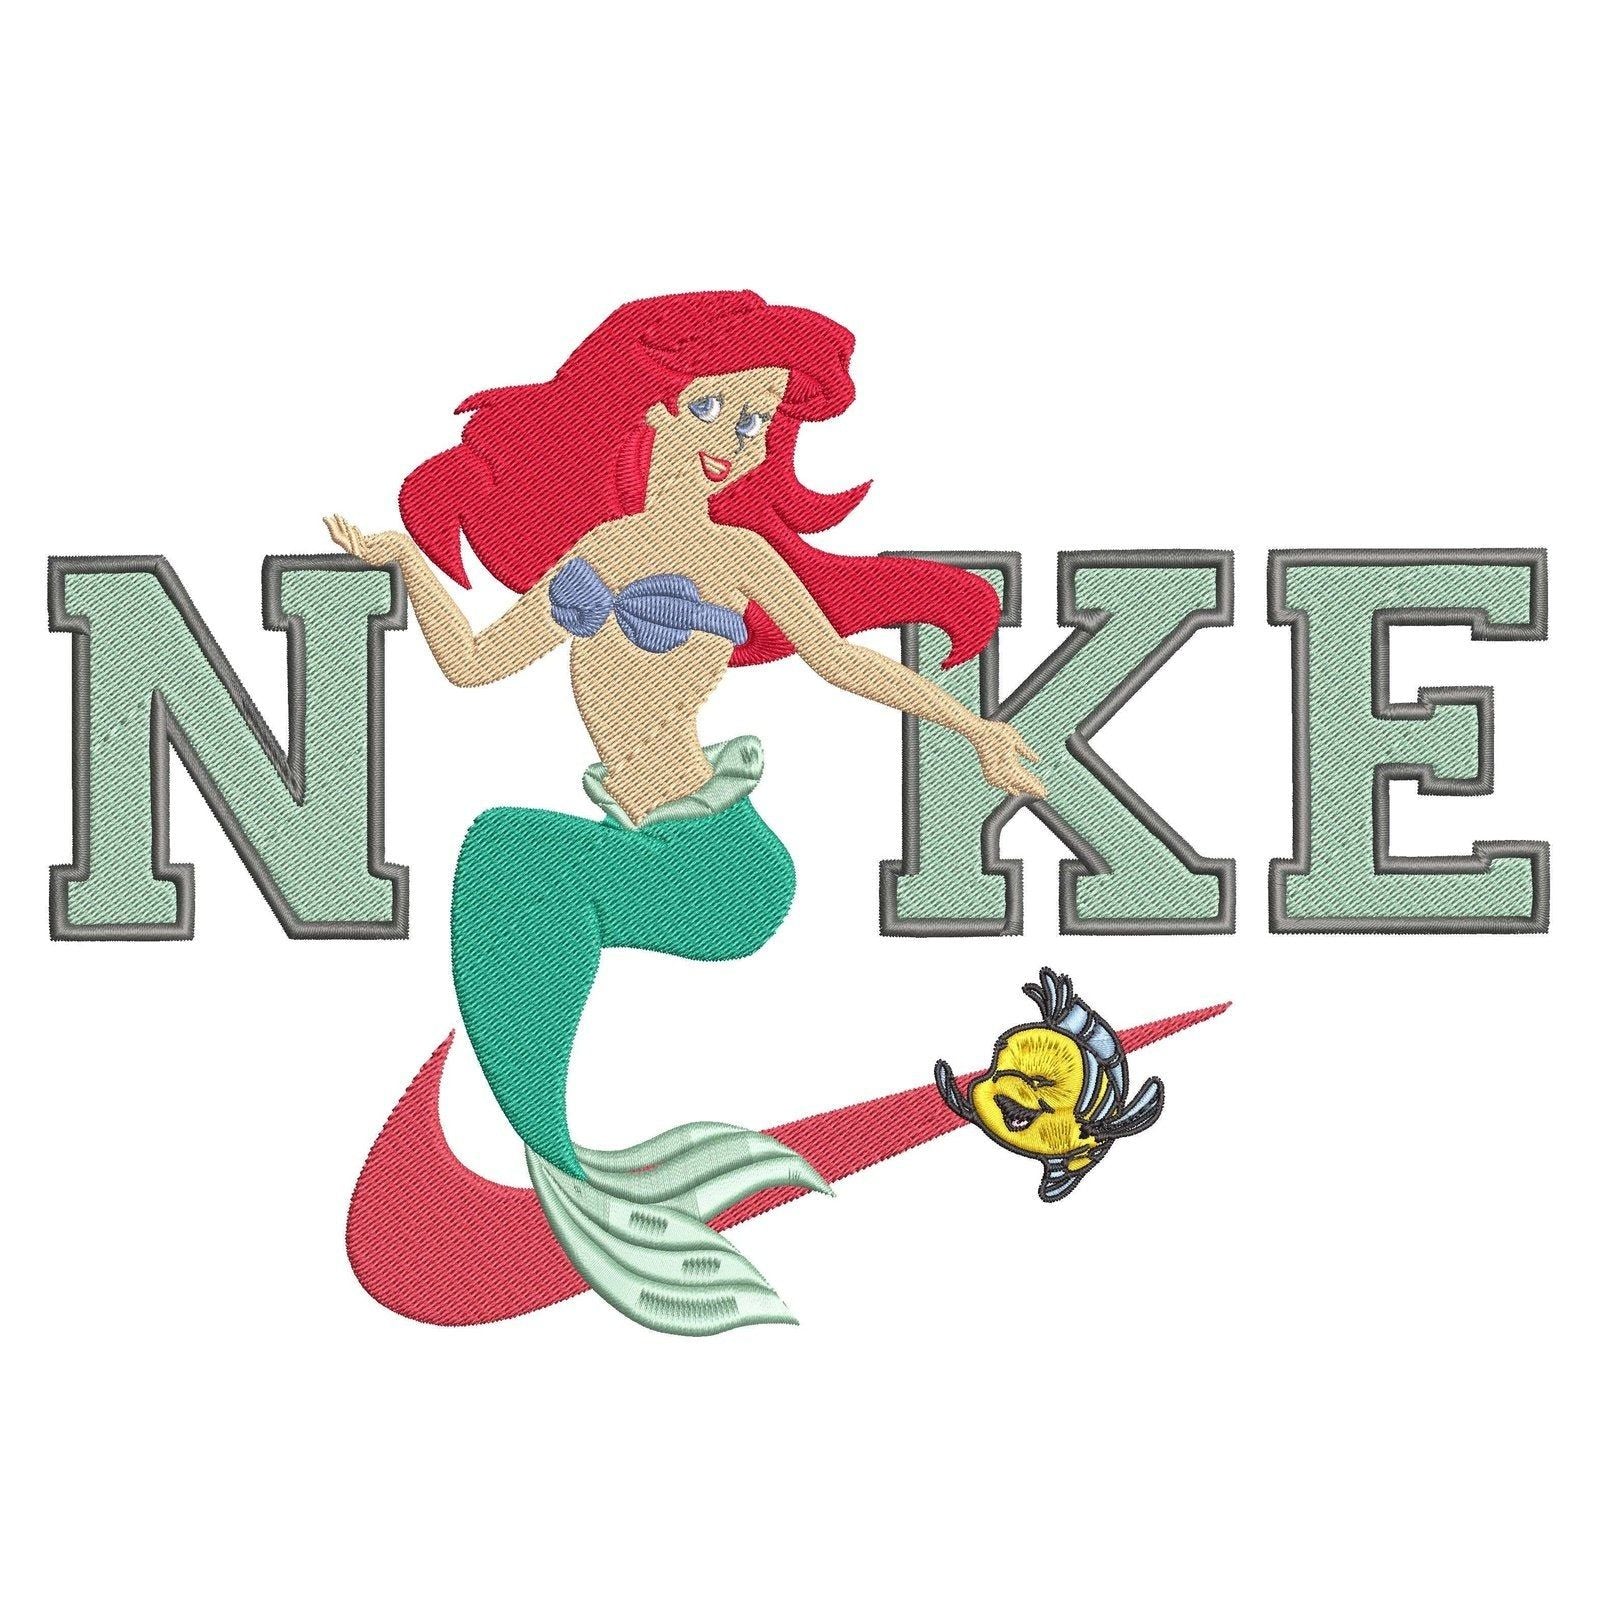 Nike The Little Mermaid - Embroidery Design - FineryEmbroidery